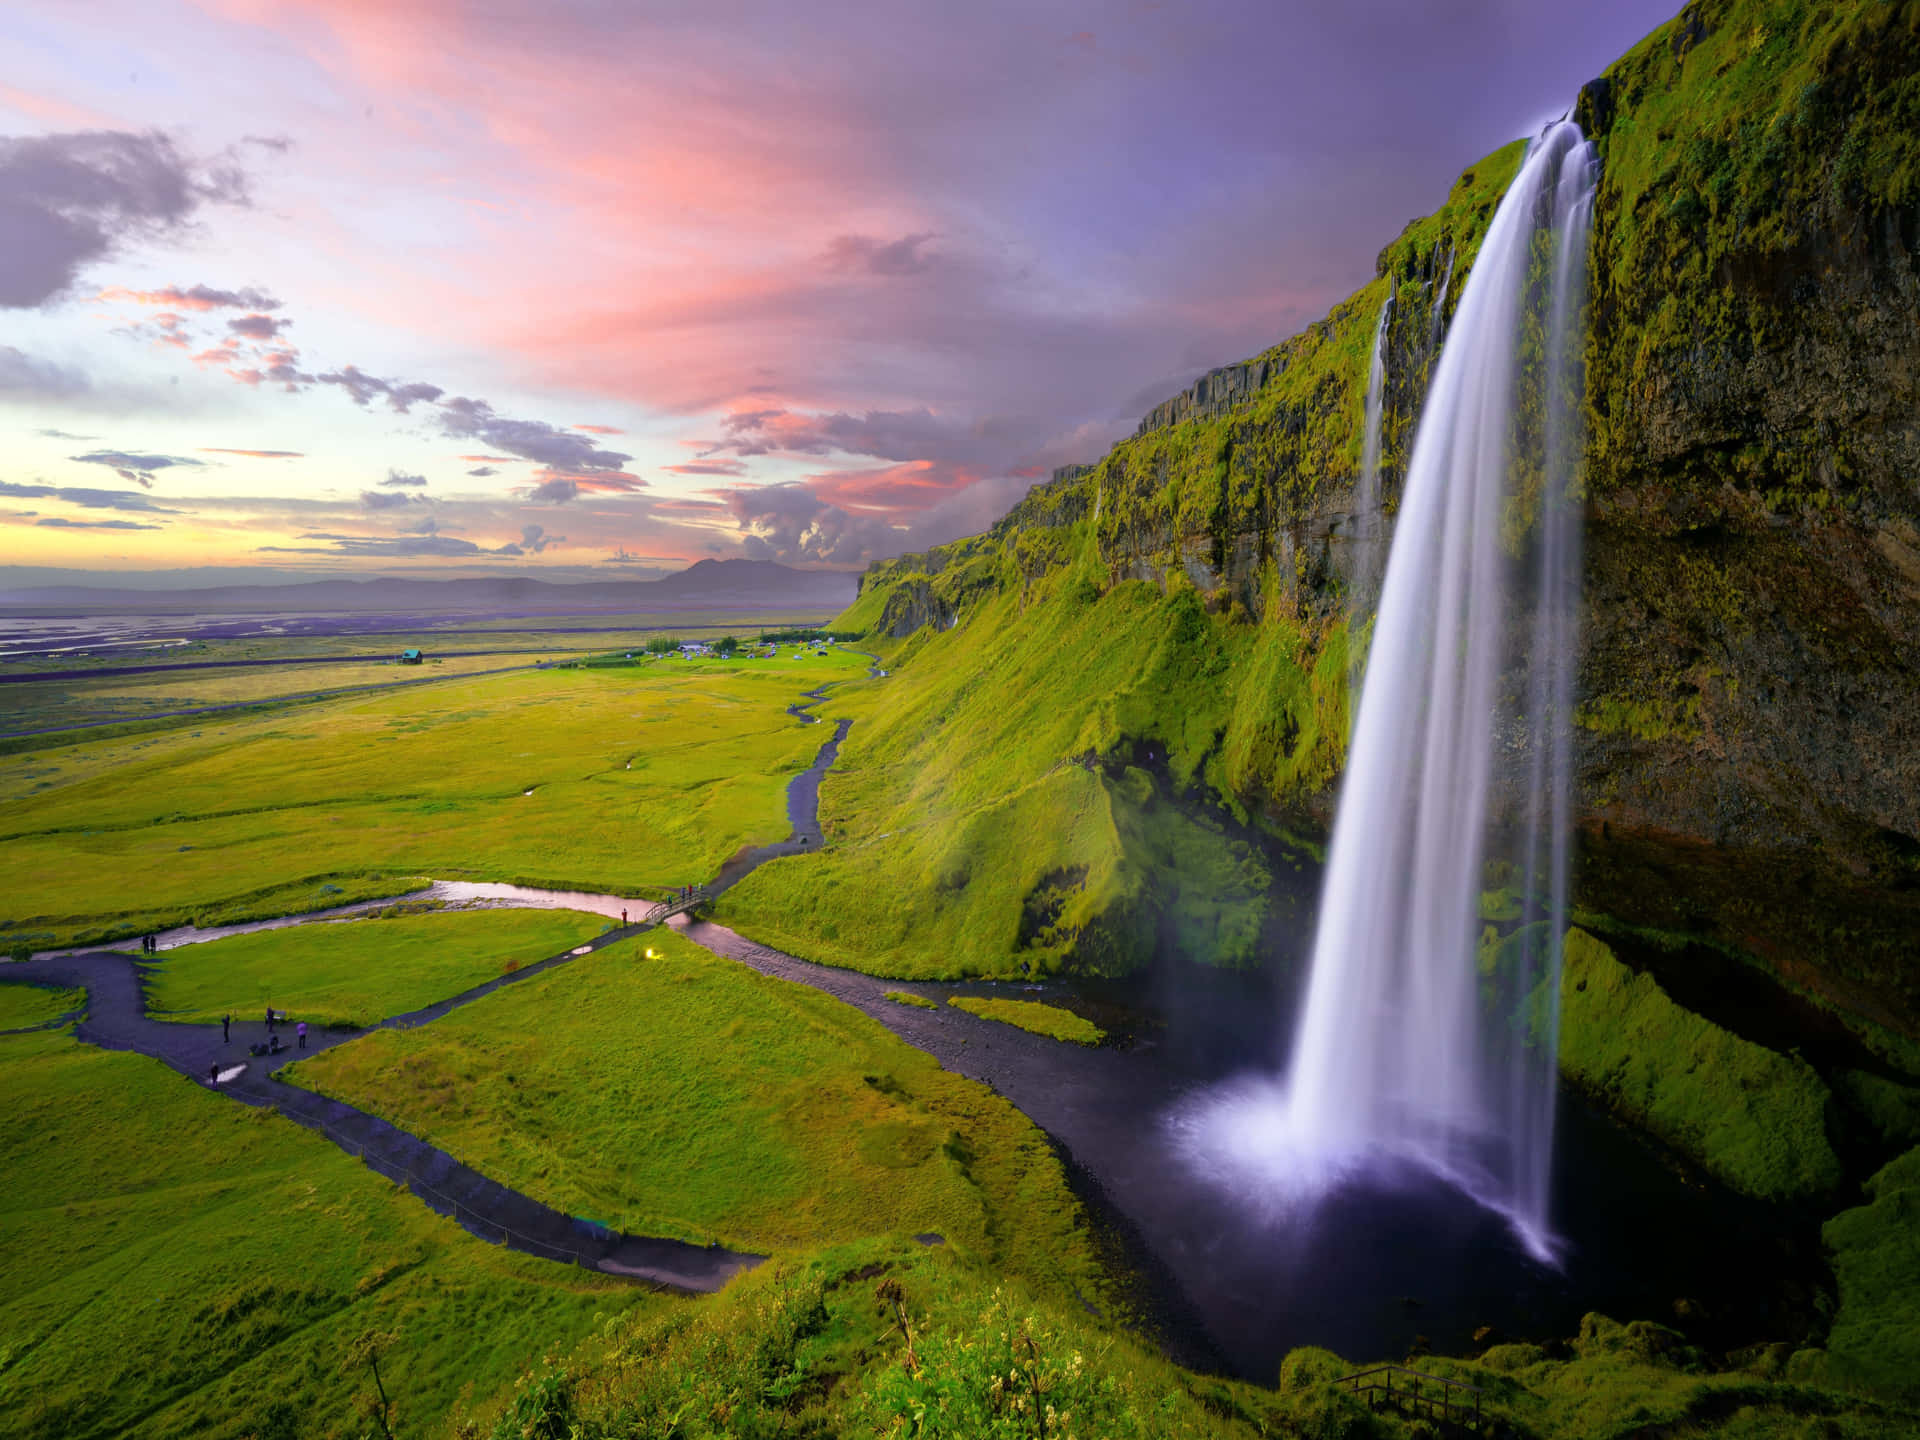 Picture Your Paradise at Iceland Desktop Wallpaper